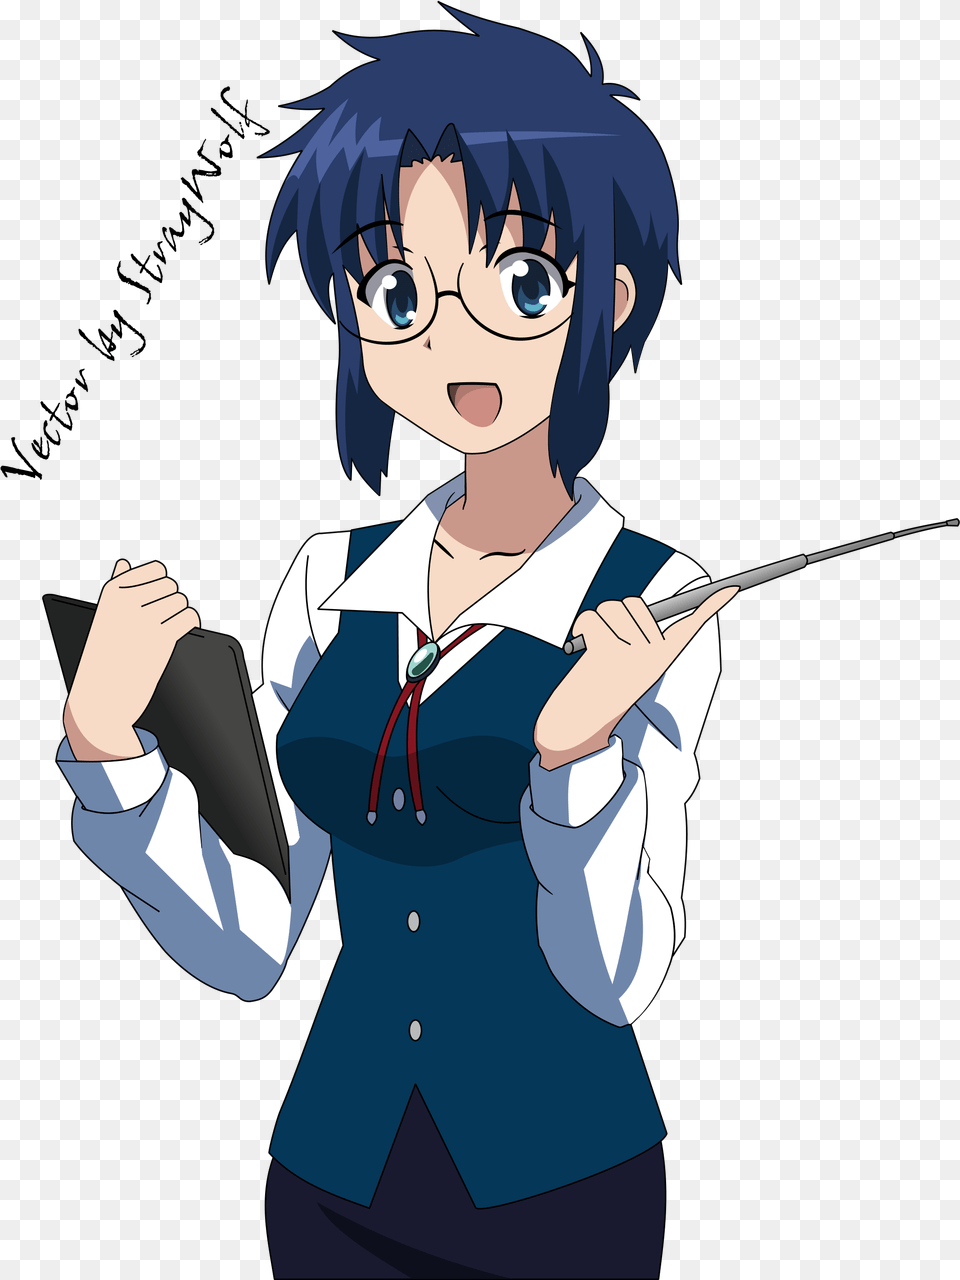 Tohohoe New Anime No Voice Acting Though Erm Another Anime Teacher Transparent Background, Publication, Book, Comics, Woman Png